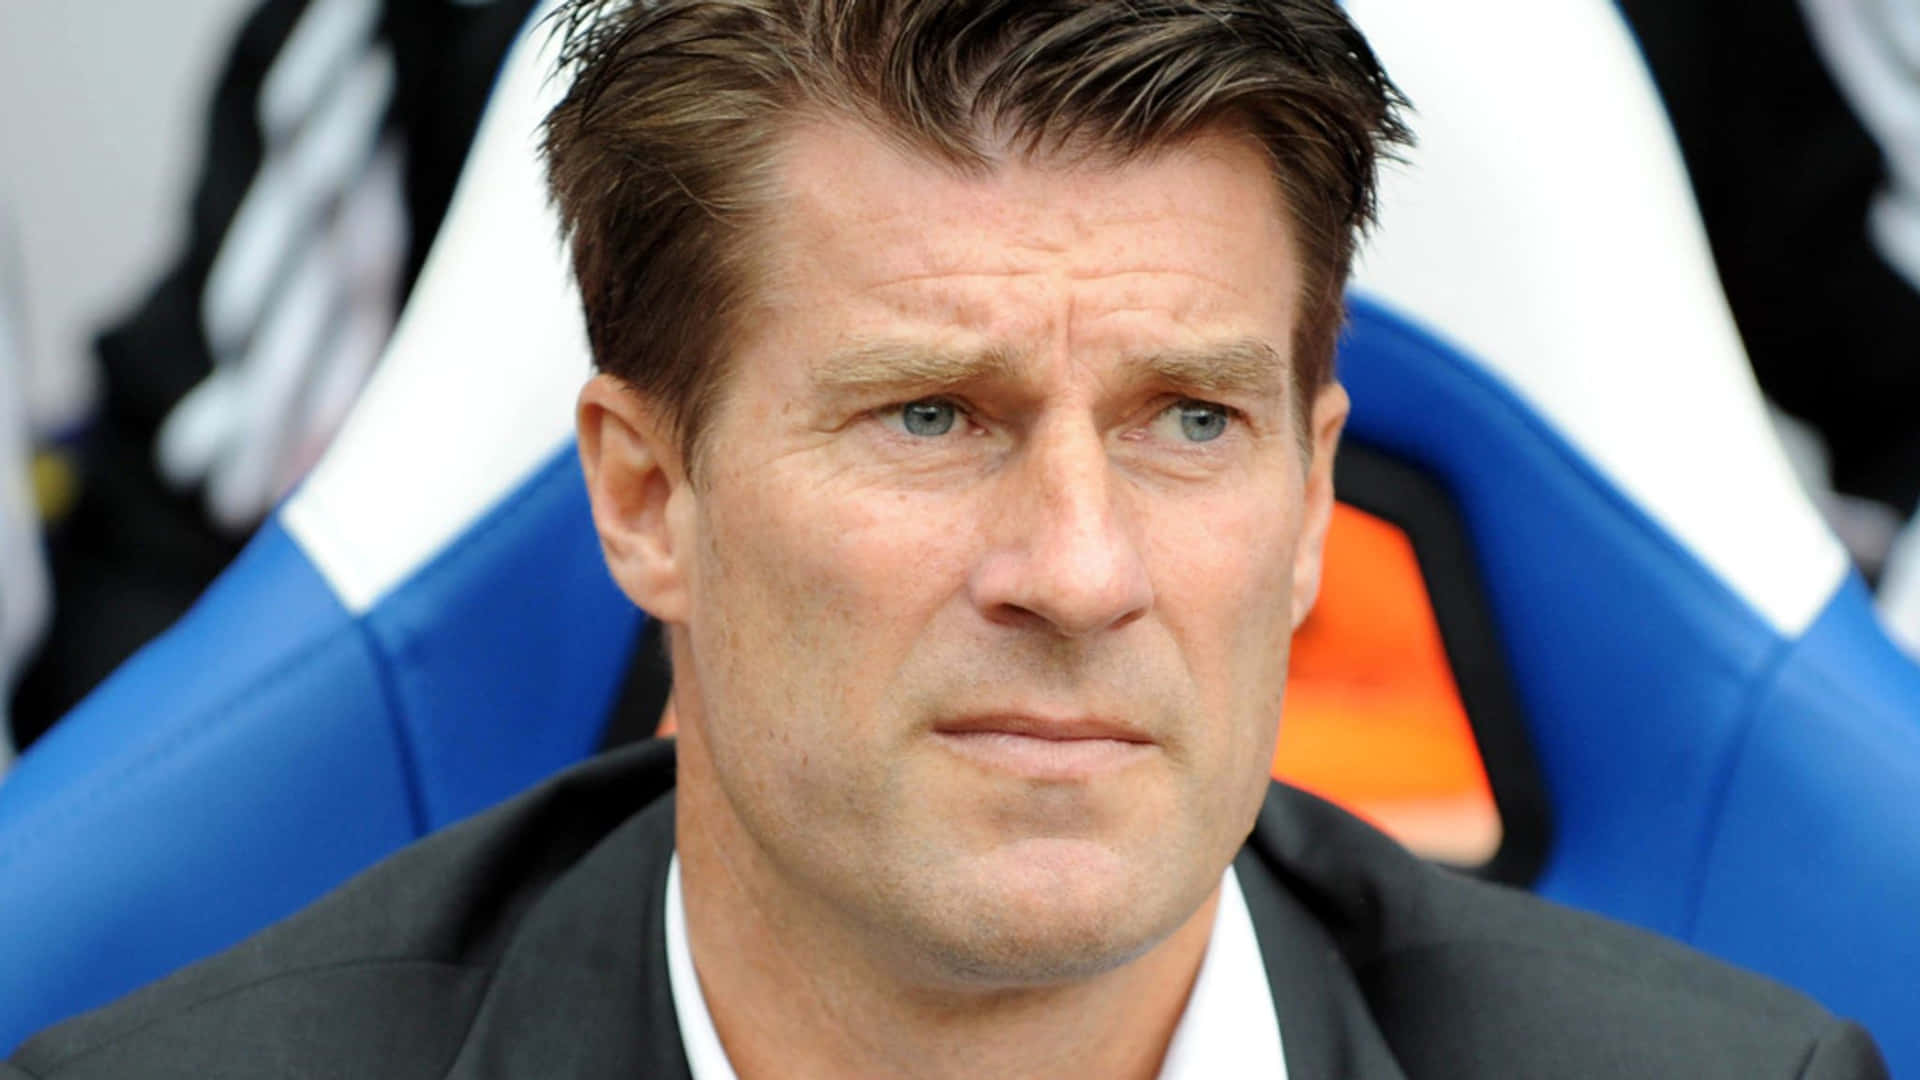 Michael Laudrup At Game Against Crystal Palace 2013 Wallpaper